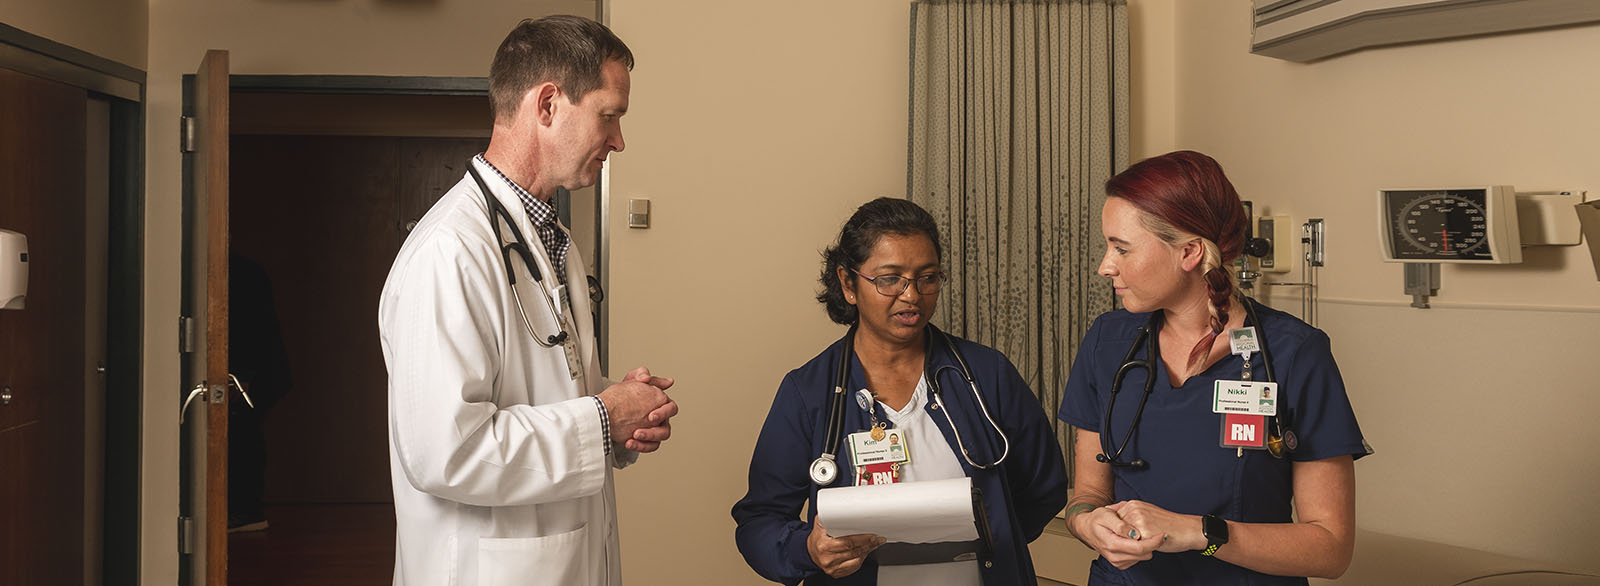 Physician preceptor speaking with nurses in a patient room.